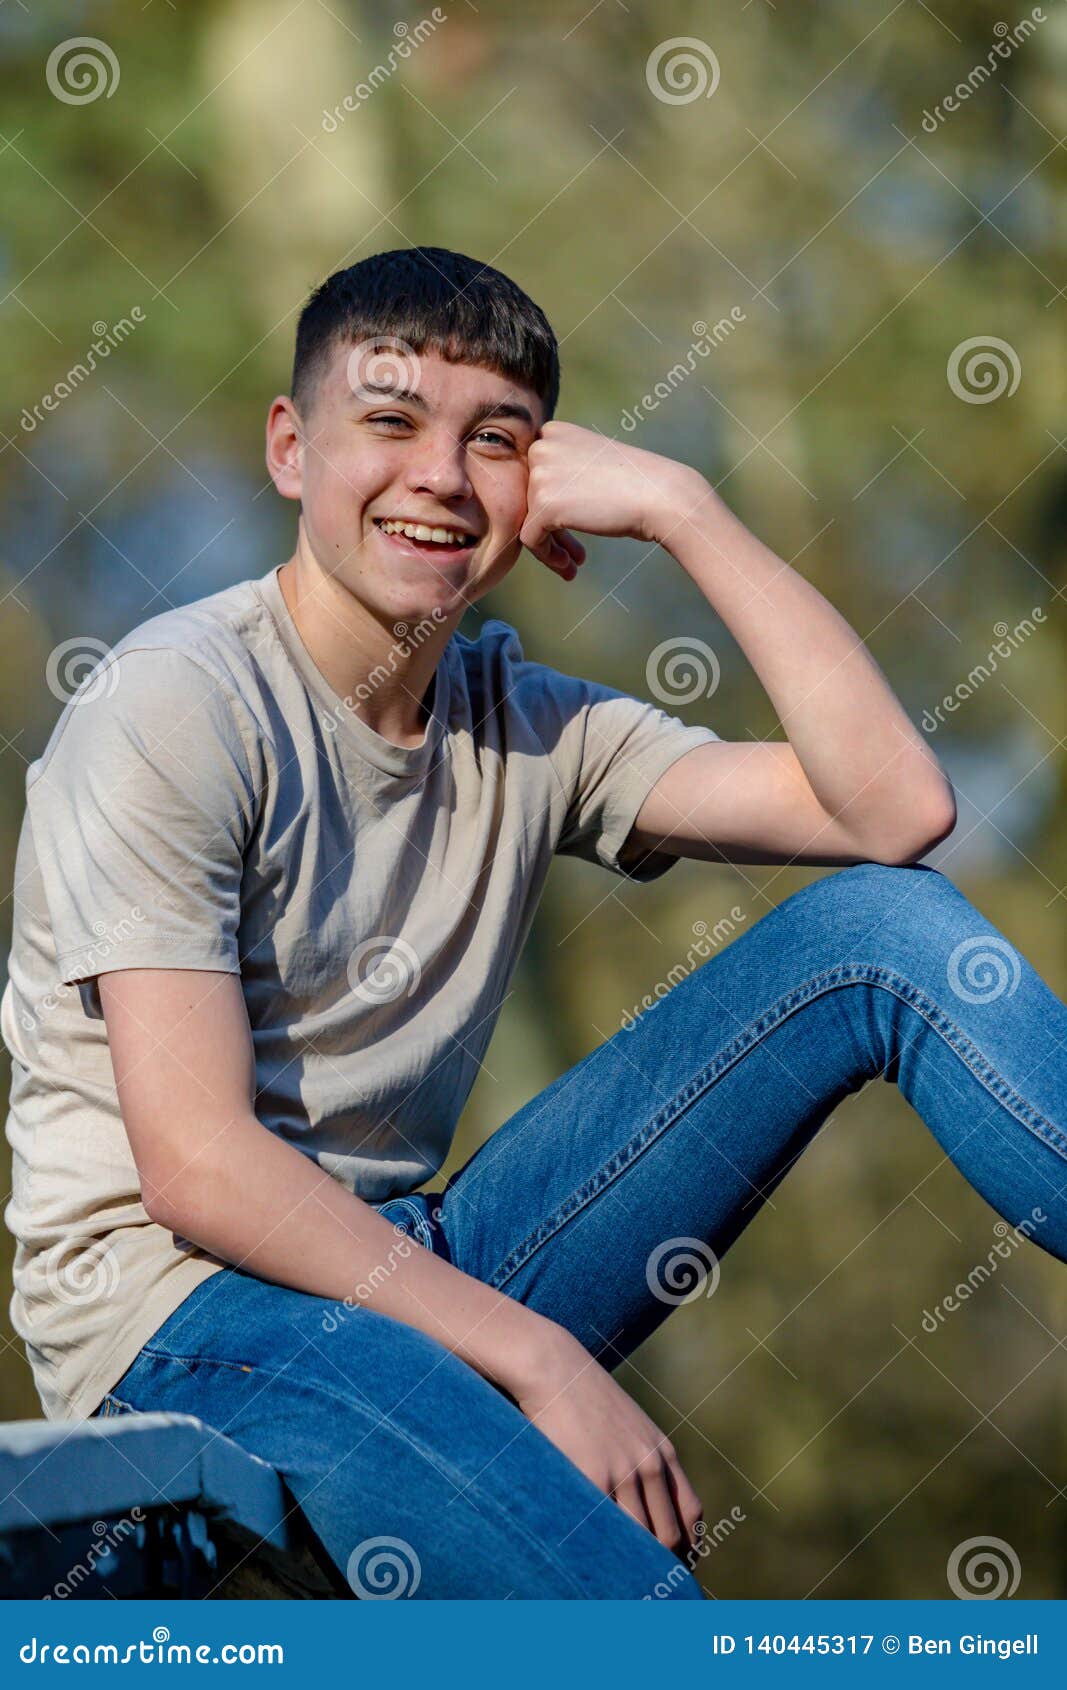 Teenage Boy Outside on a Bright Spring Day Stock Image - Image of tree ...